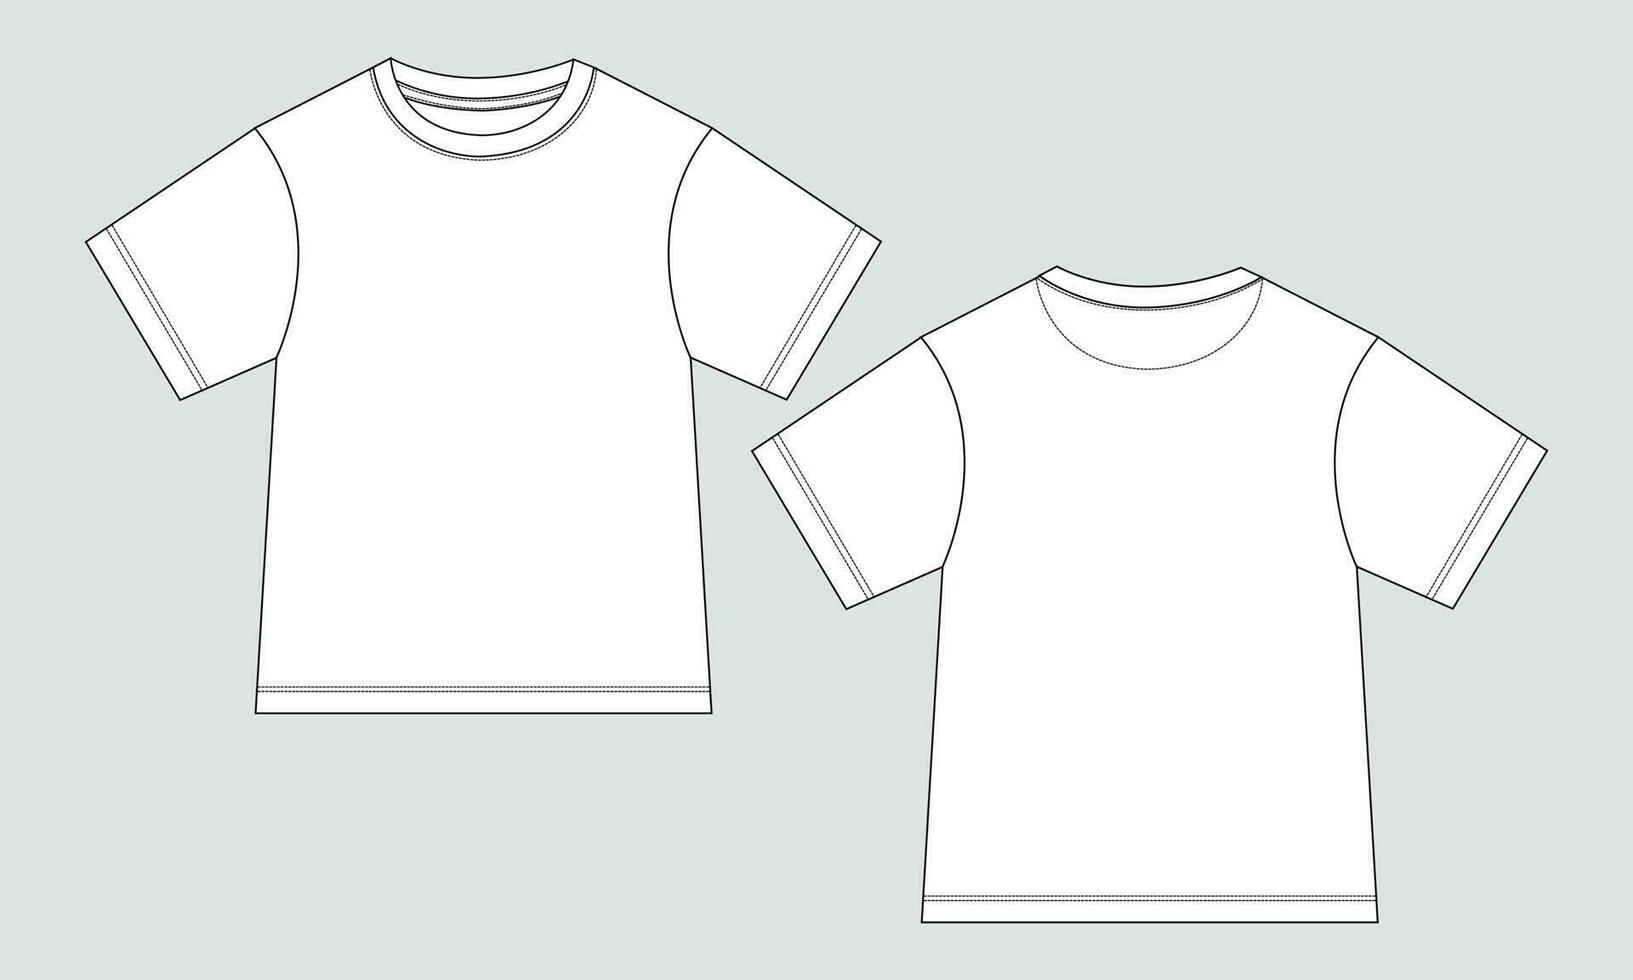 Baby boys t shirt technical drawing fashion flat sketch vector illustration template front and back views. Apparel design mock up for kids isolated on grey background